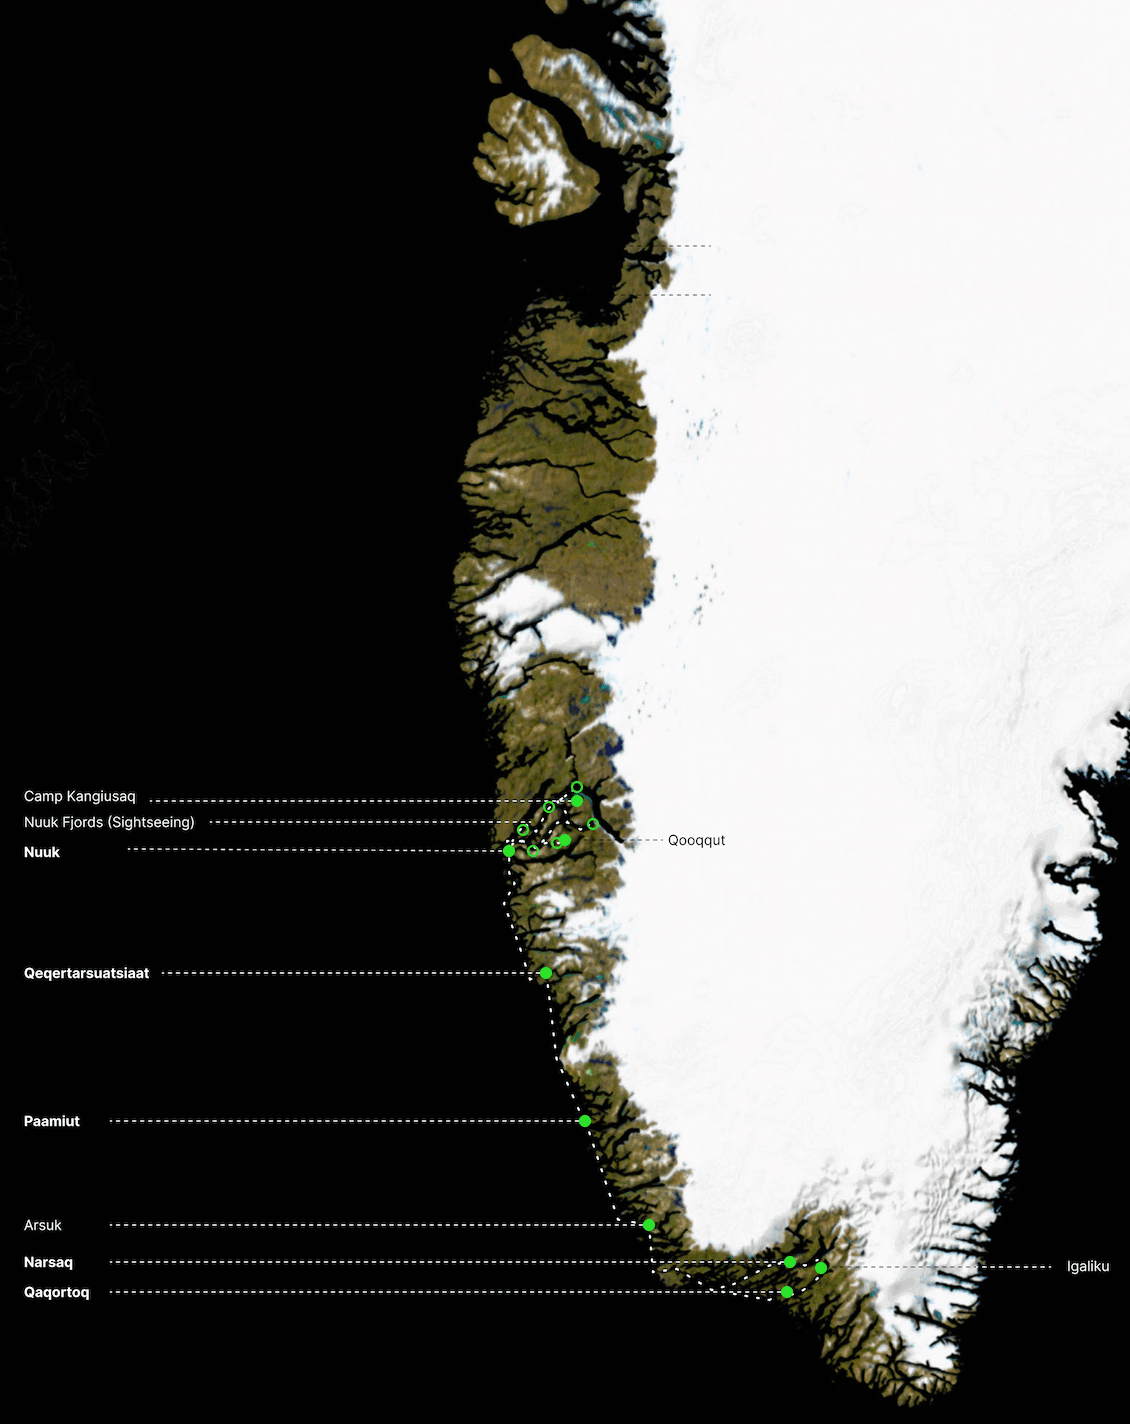 The South Greenland Voyage map